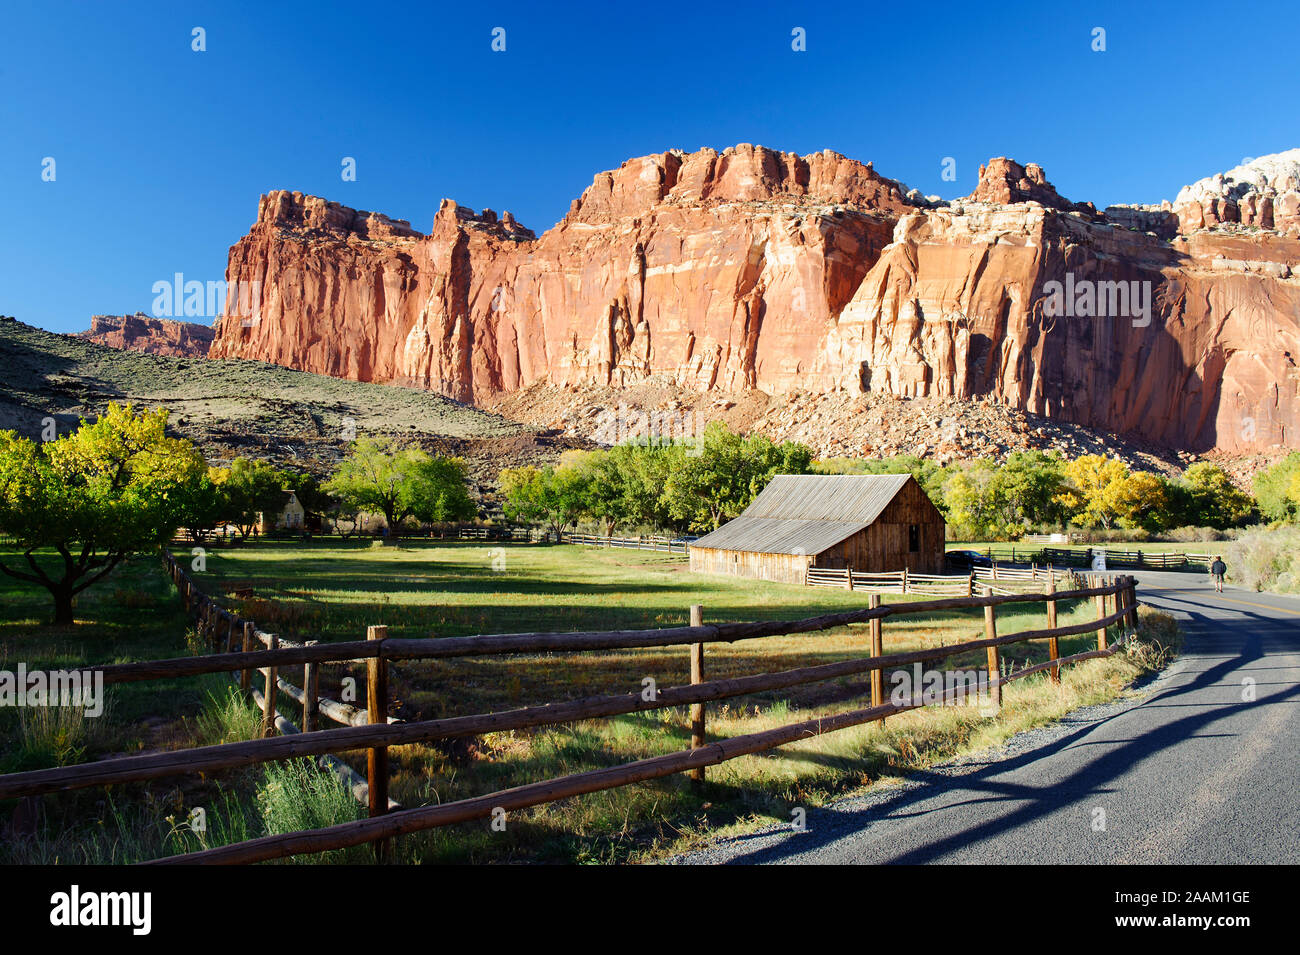 Historic Gifford farm house in Fruita, a  Mormon settlement situated in Capitol Reef National Park, Utah, USA. Stock Photo